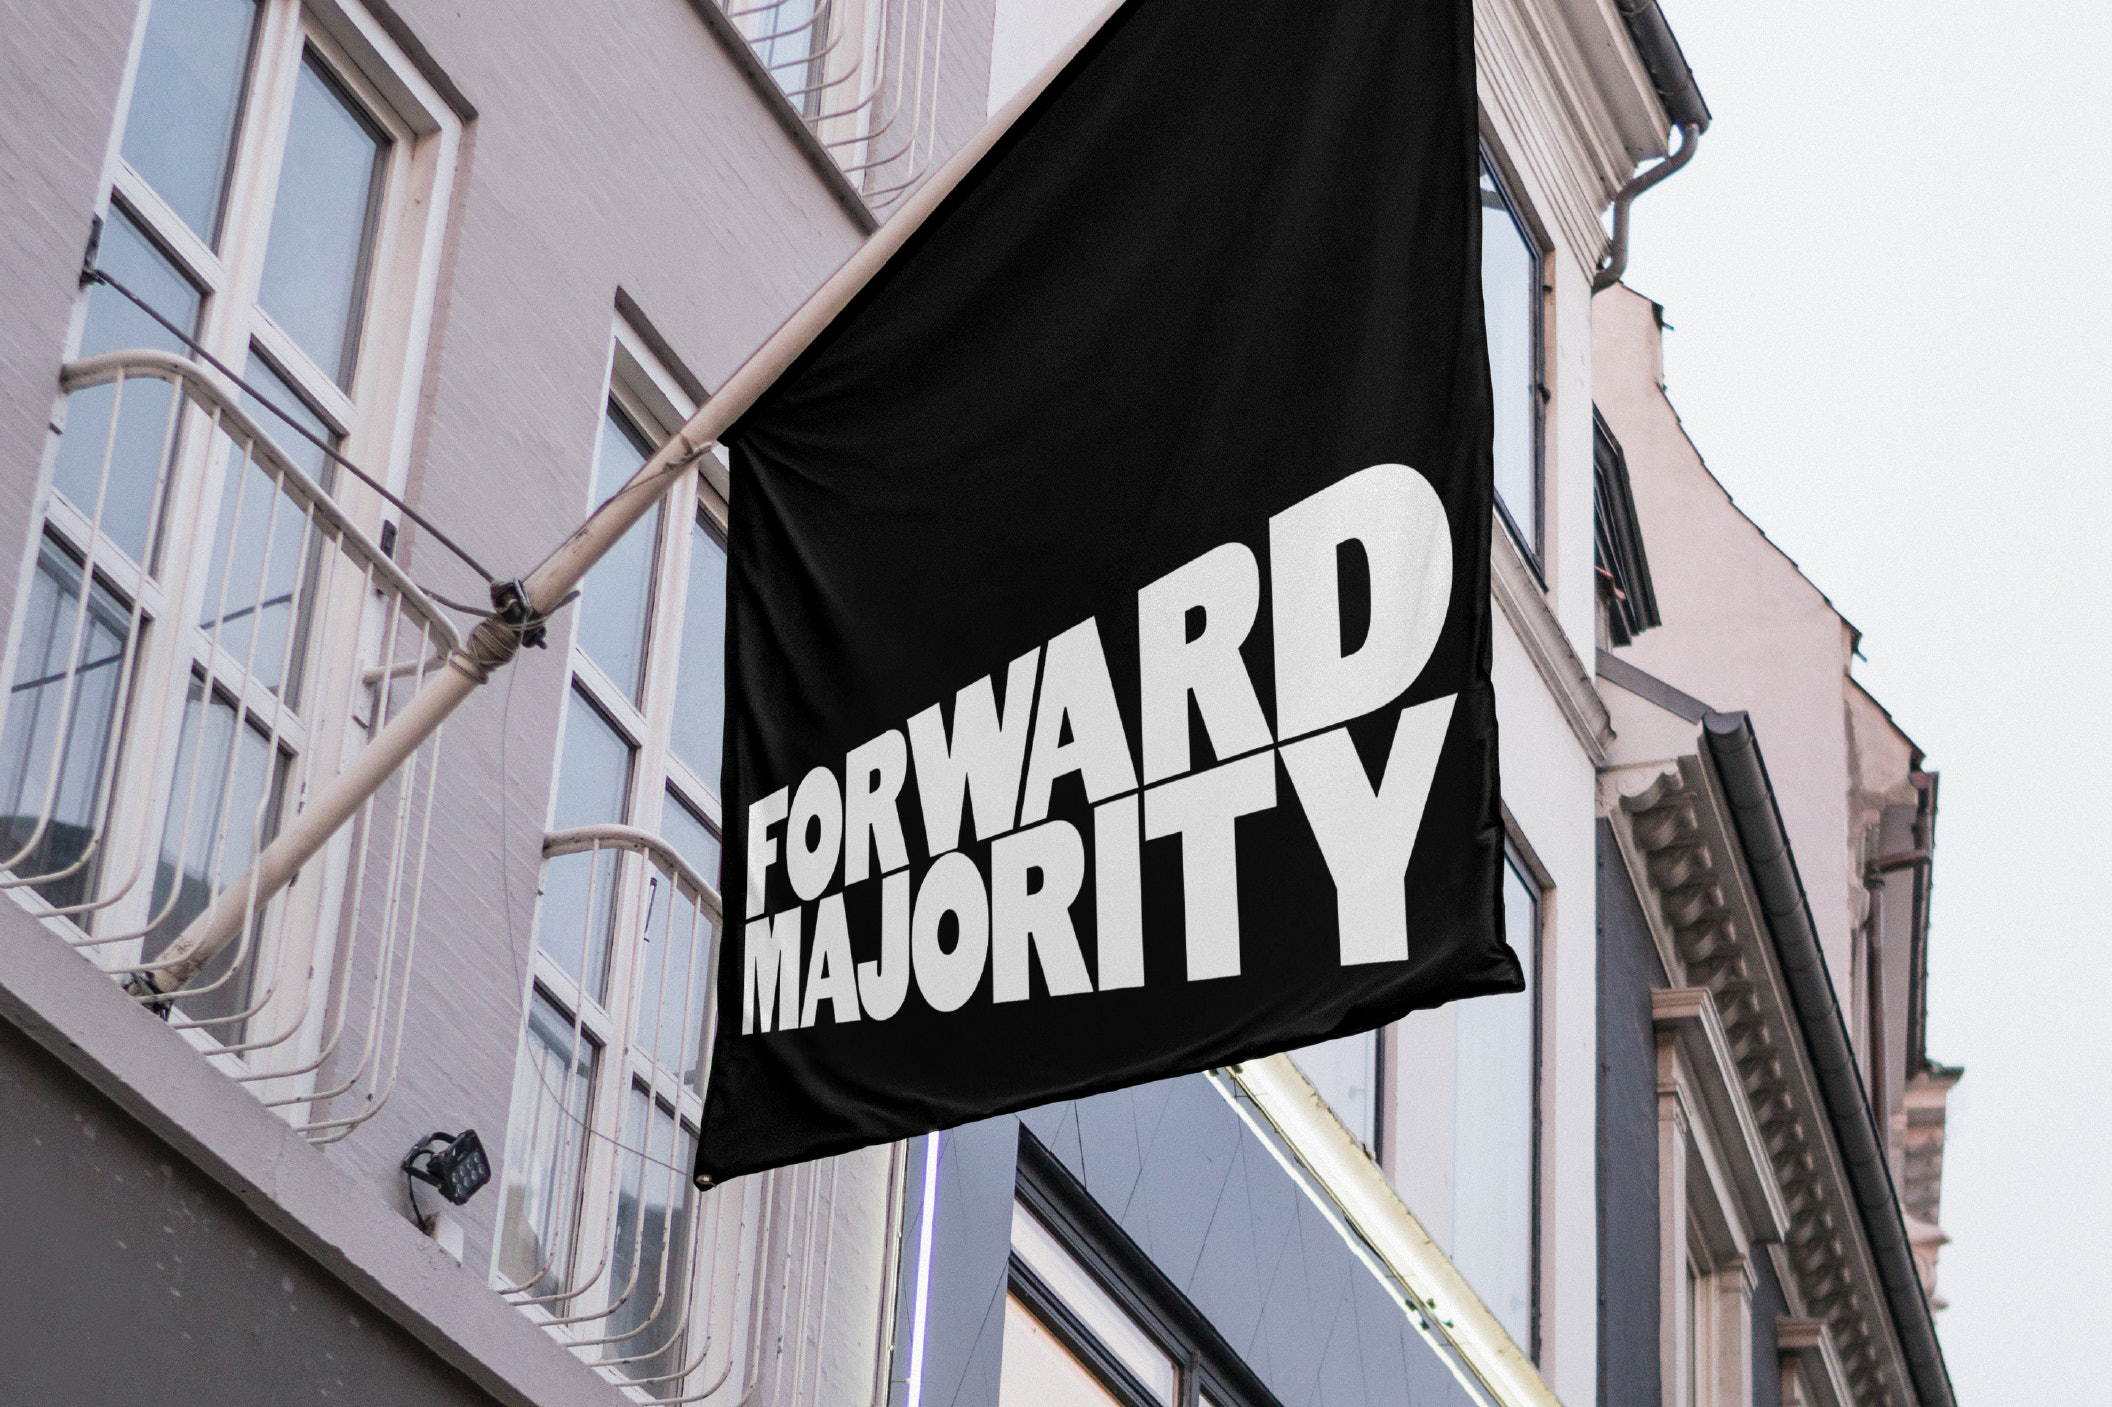 Visual identity and flag for political action committee Forward Majority designed by New York-based studio Order